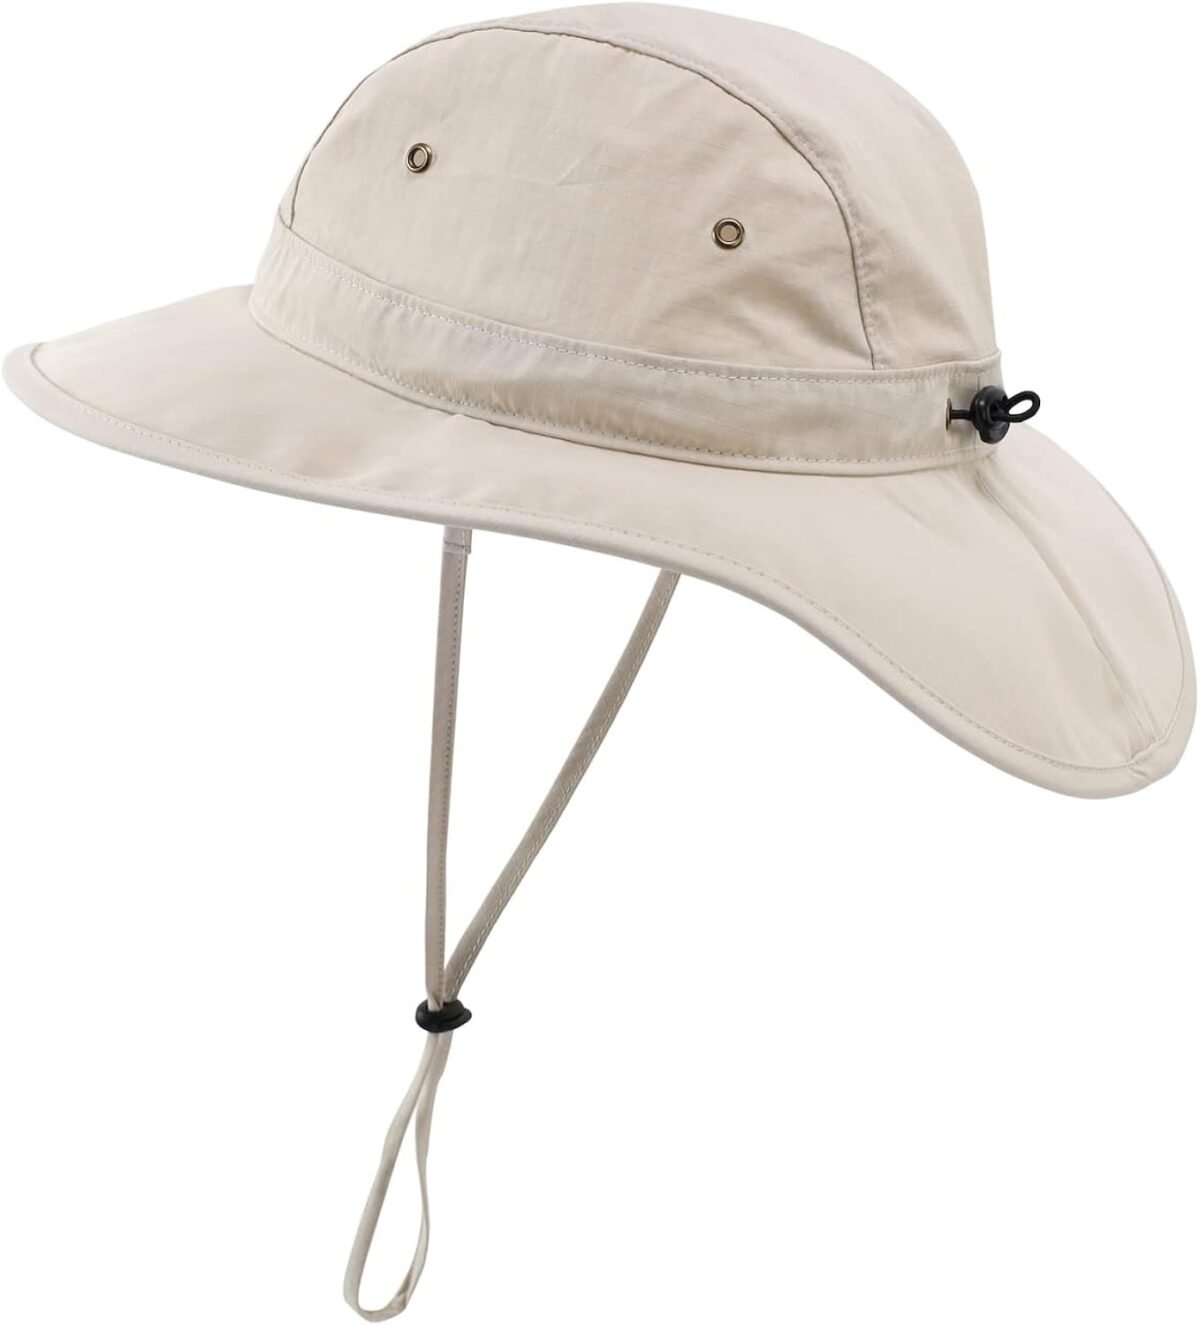 5 Summer Hats Reviewed & Compared